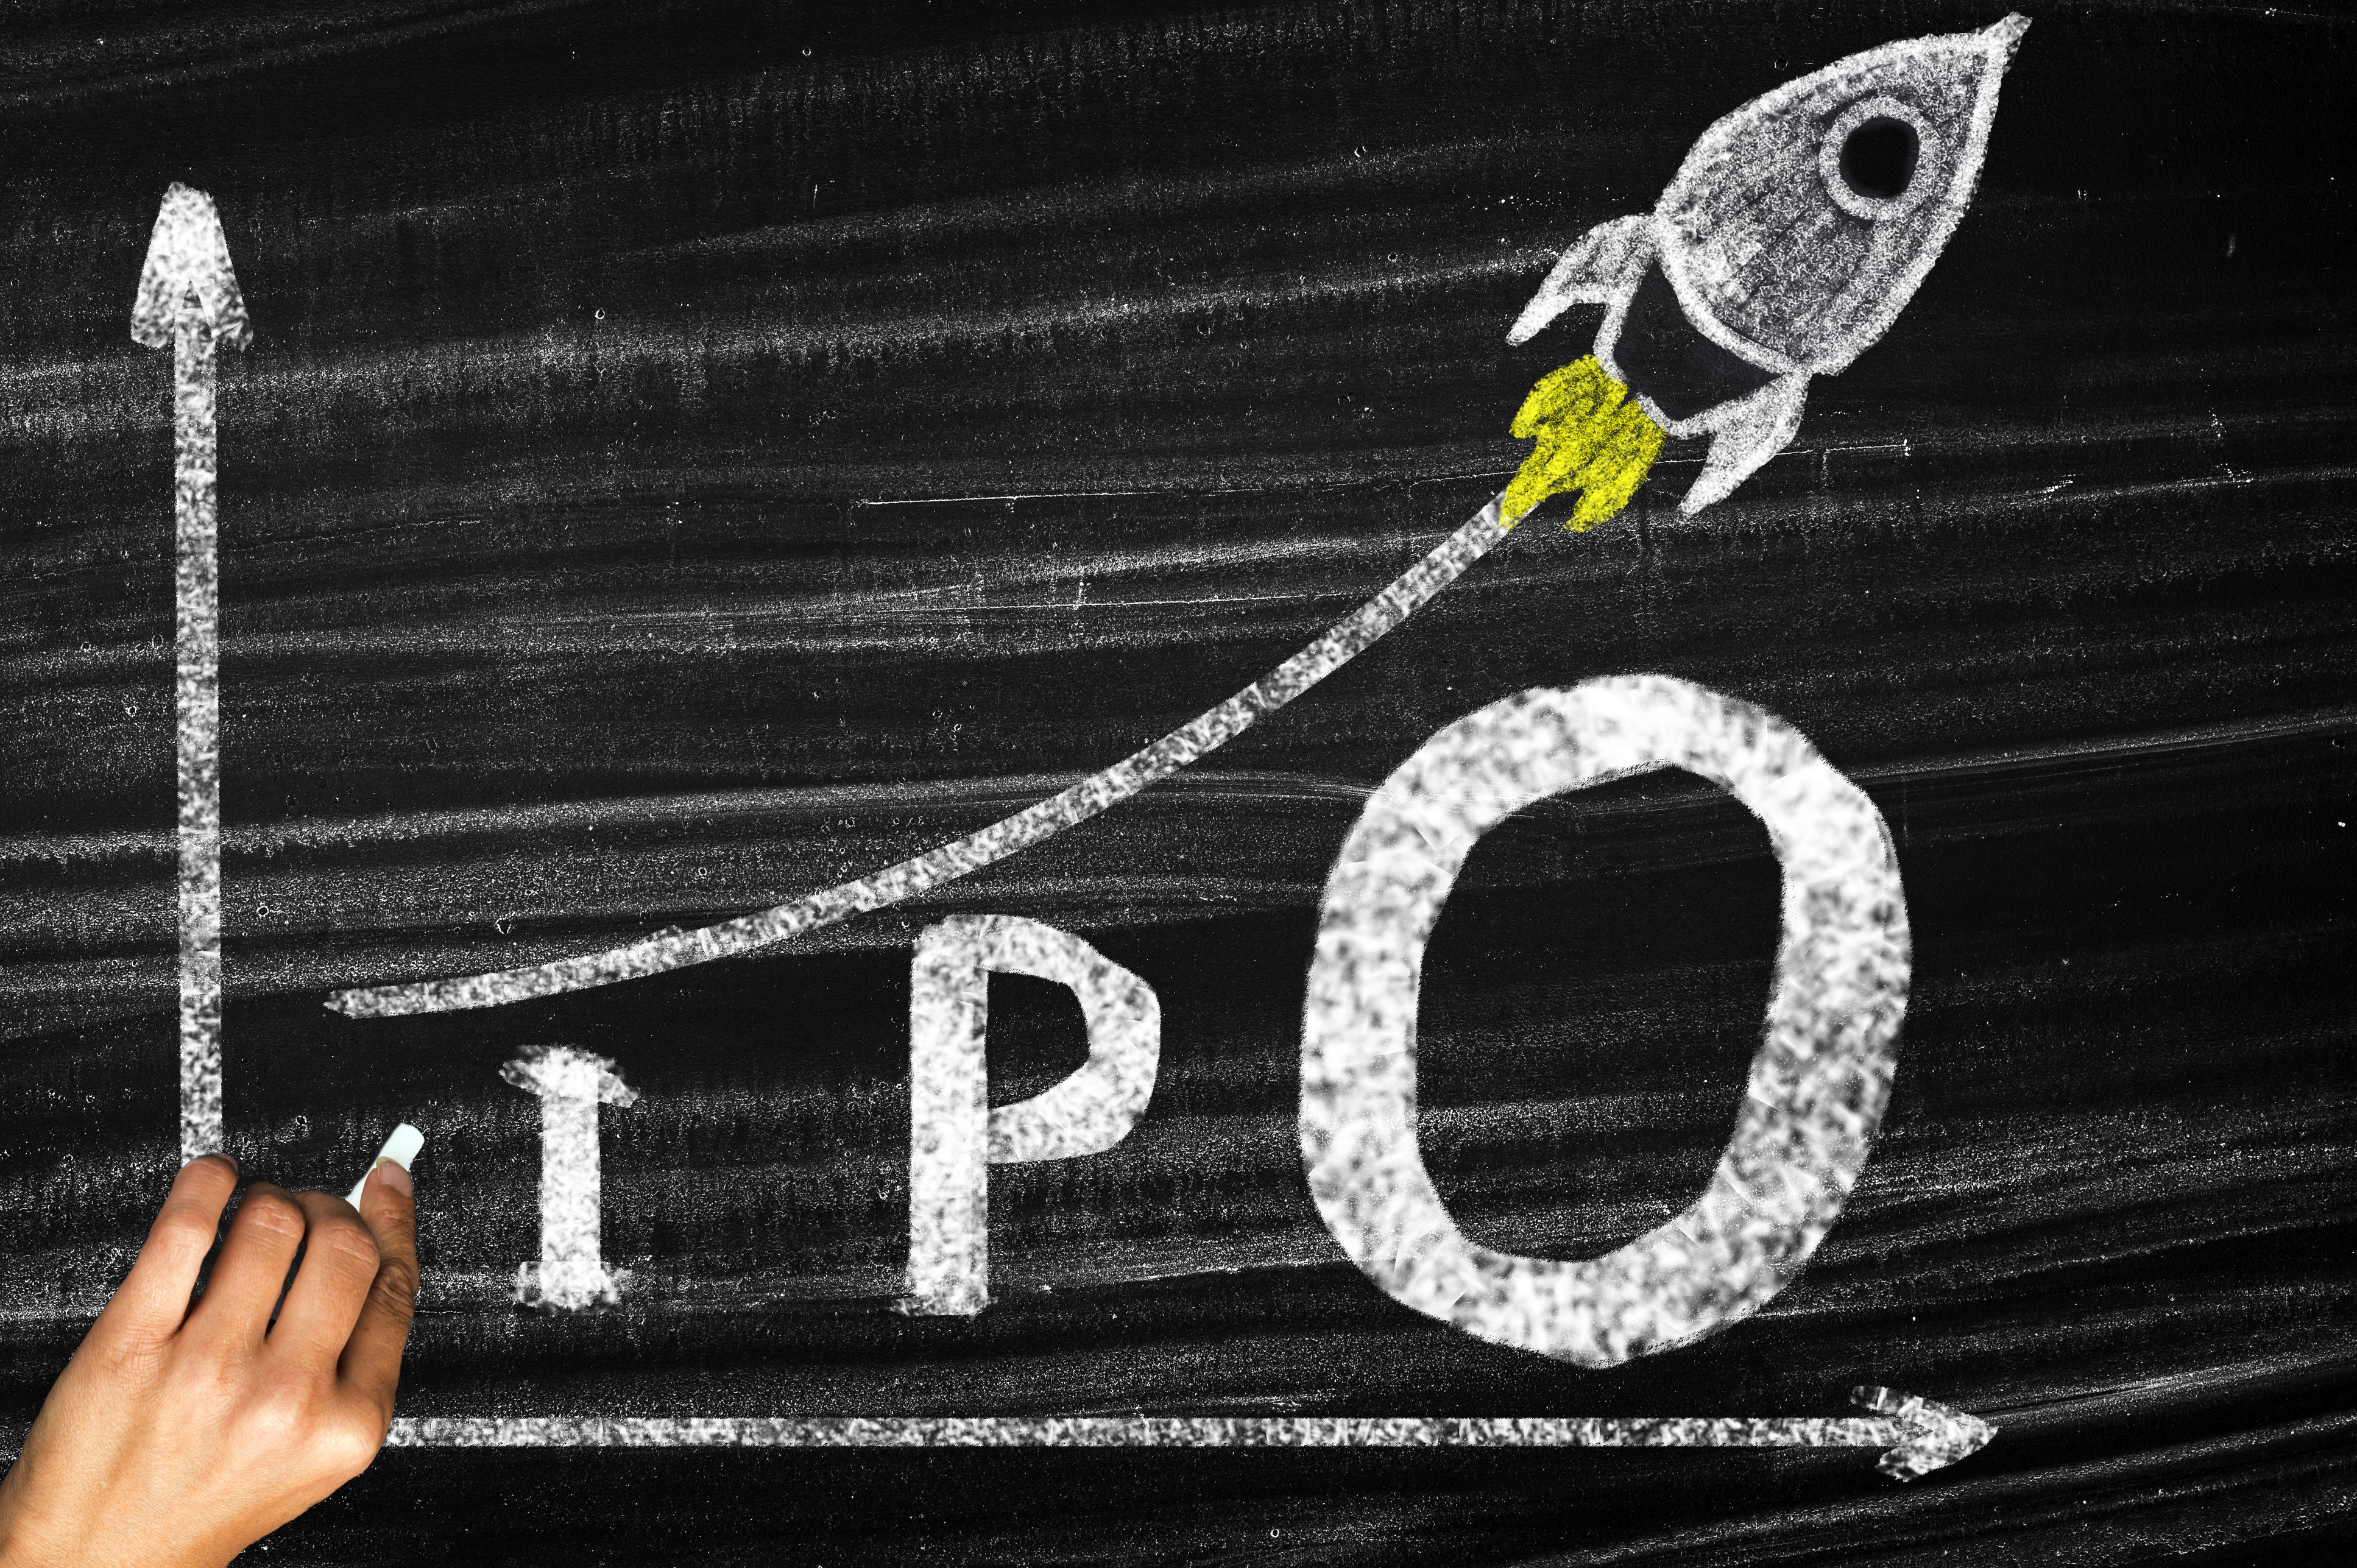 India witnessed 19 IPOs worth $1.84 bn in fourth quarter of 2020: EY report